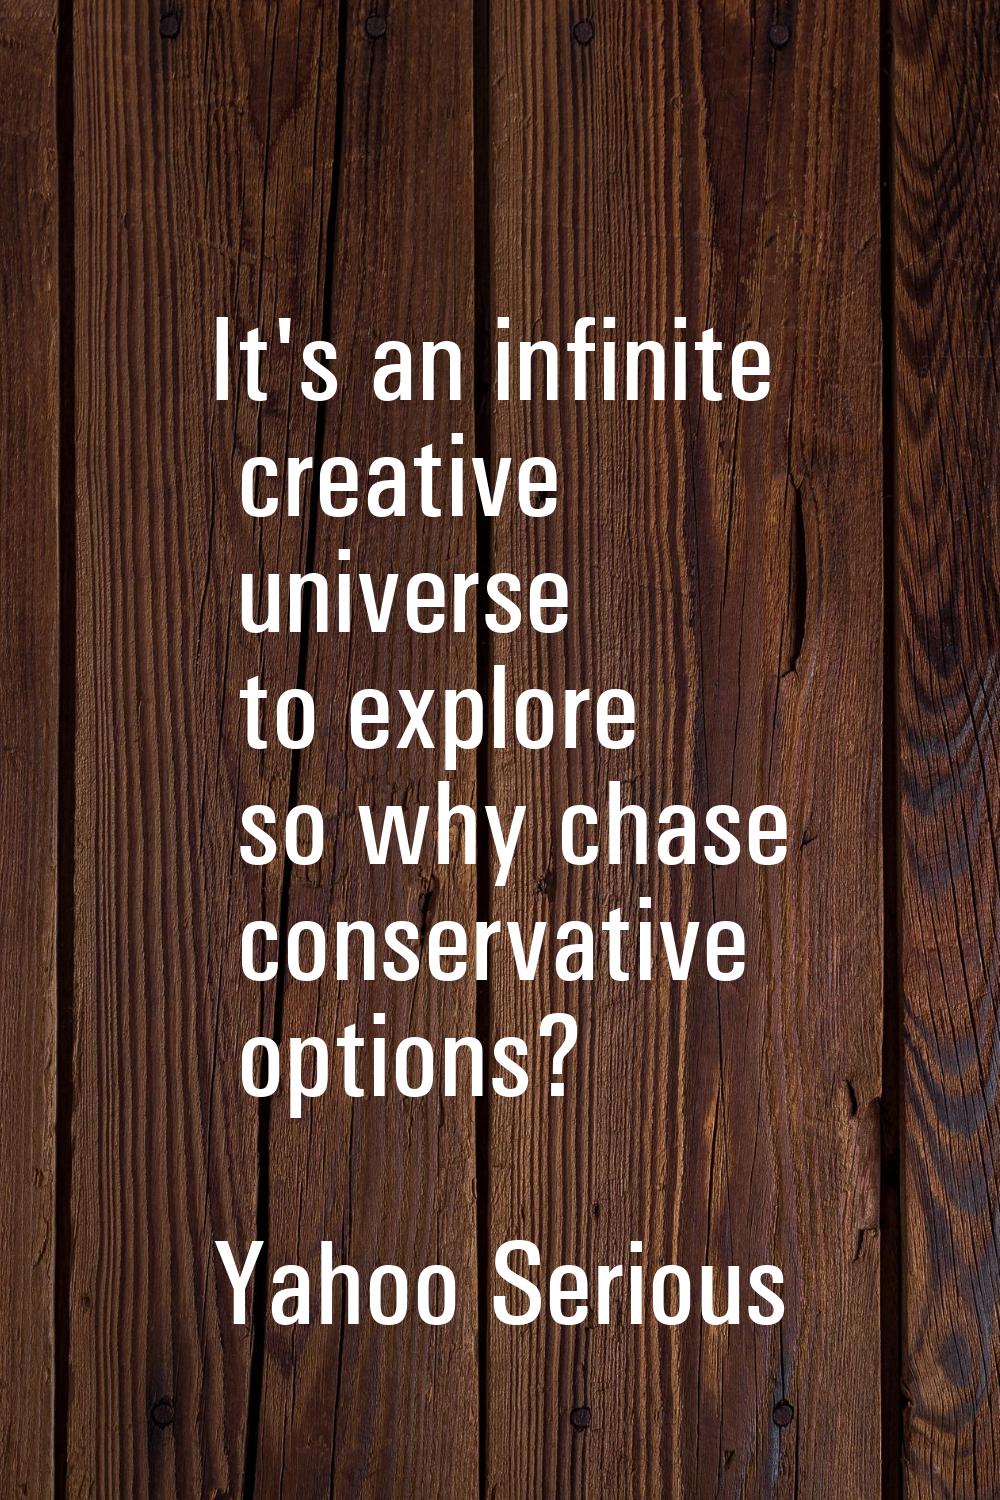 It's an infinite creative universe to explore so why chase conservative options?